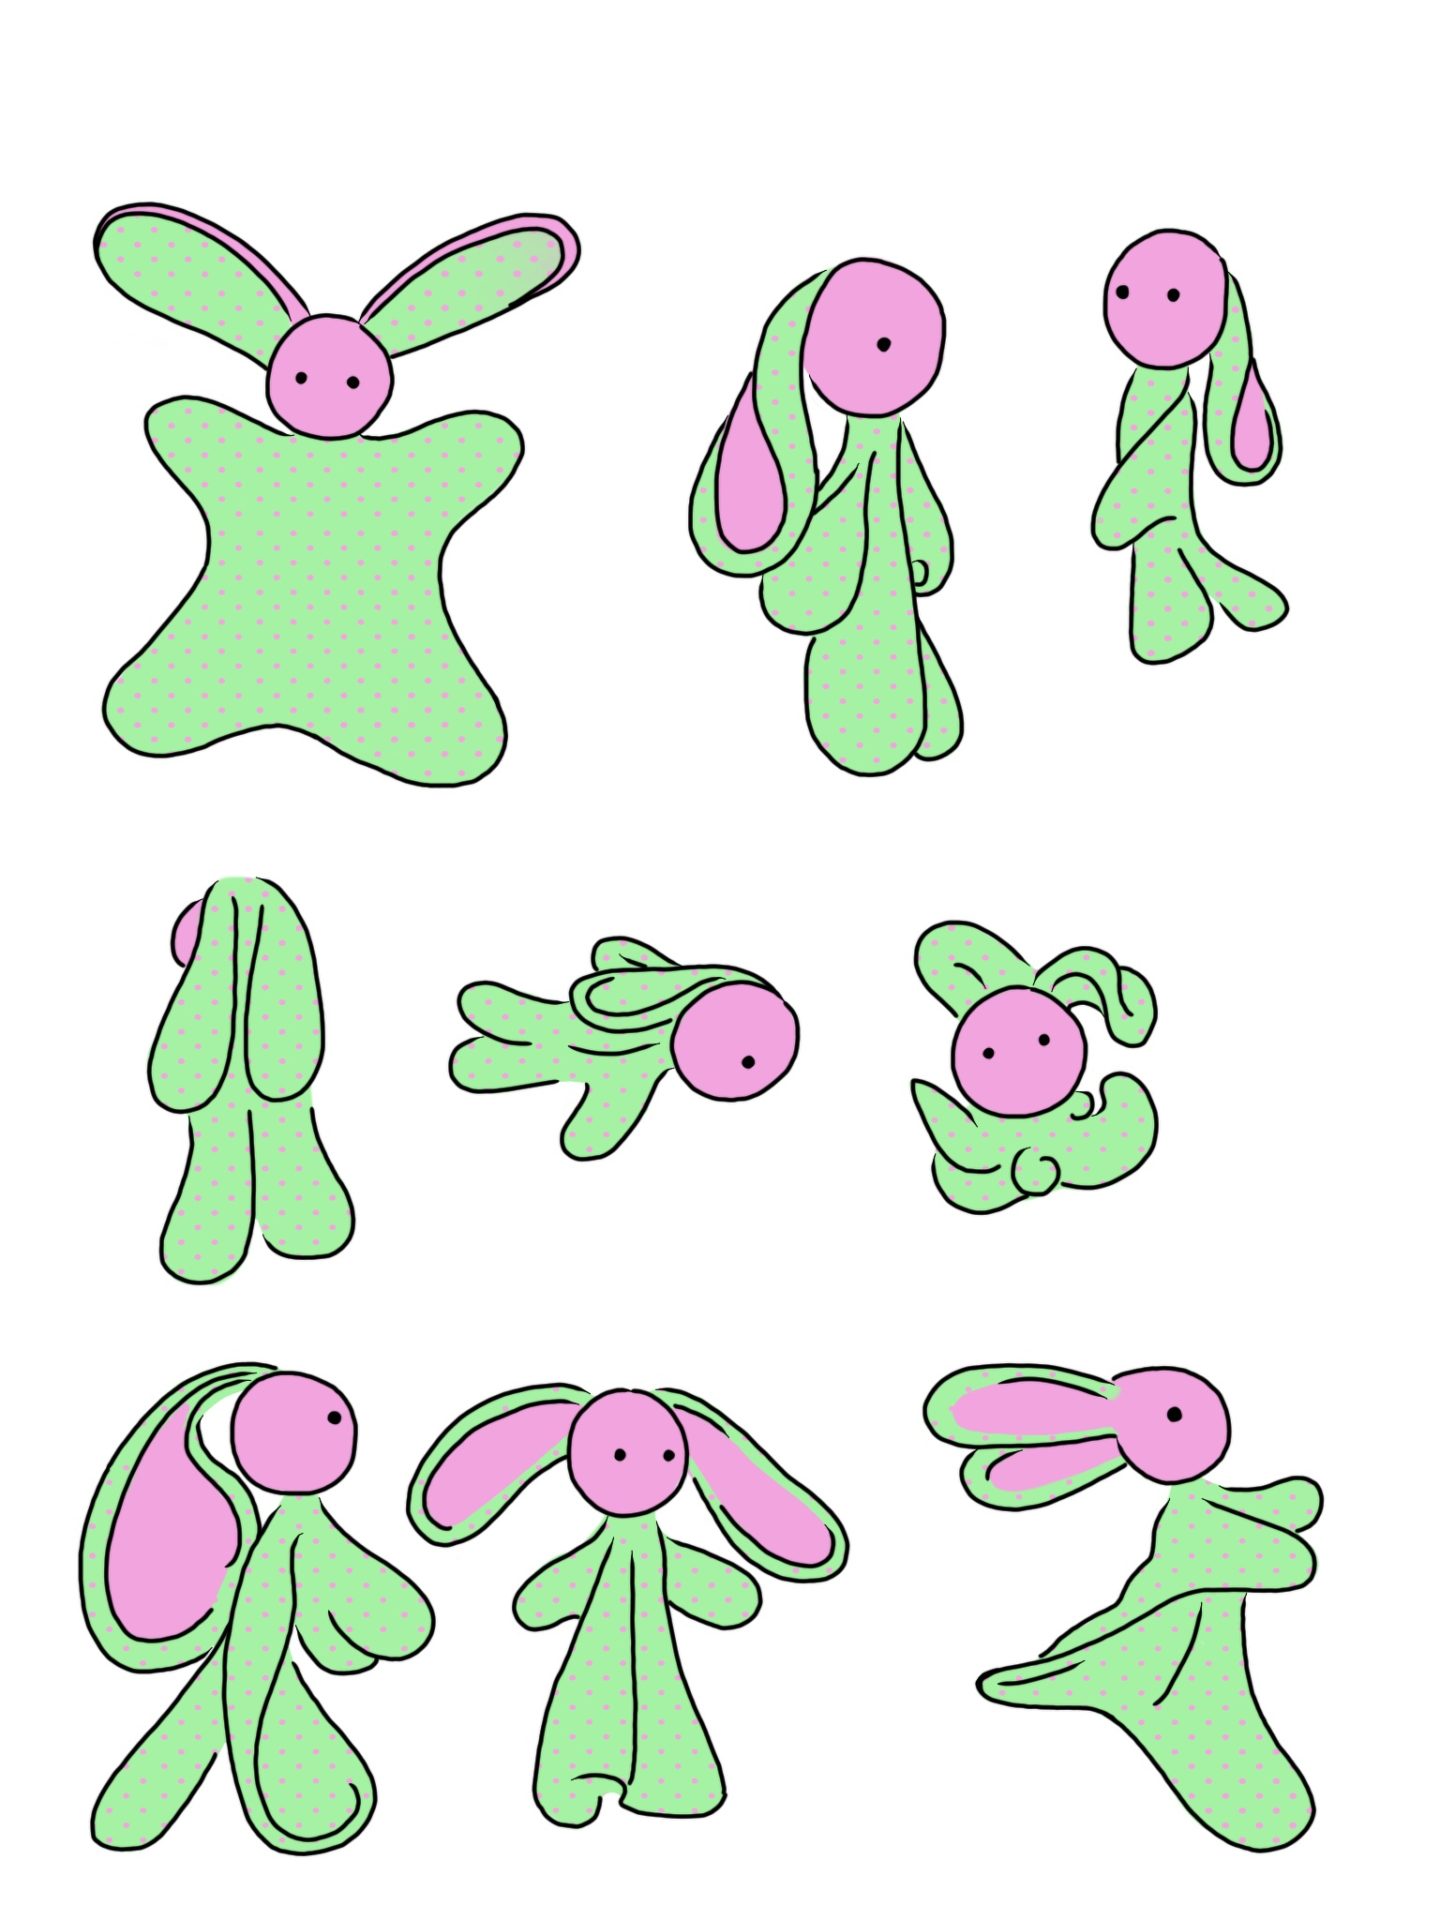 Concept art of Maggie the bunny washcloth doll